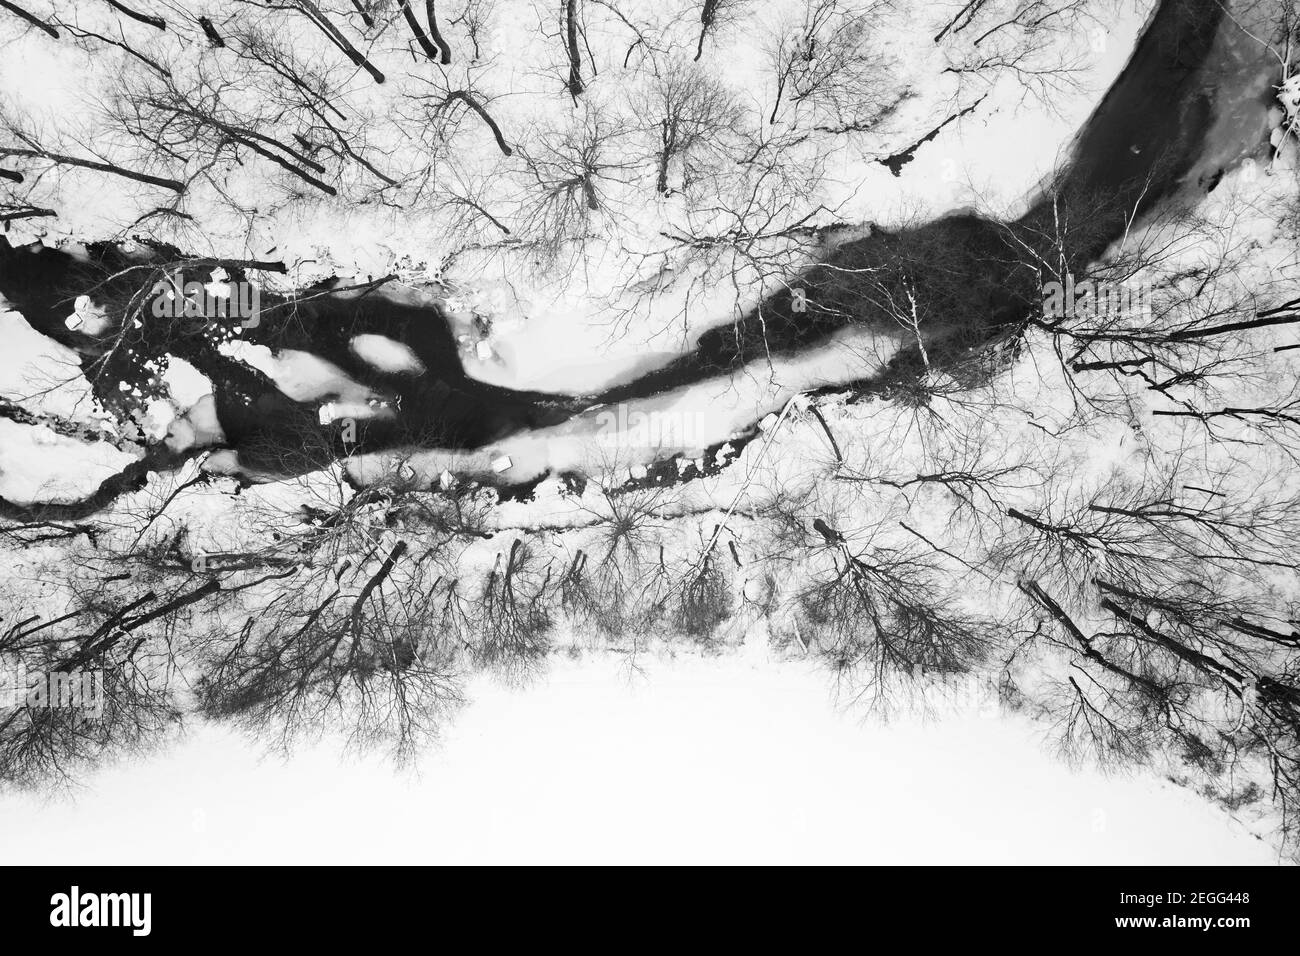 A black and white image of Gurthrie creek in Jackson County, IN choked with ice and flanked by lots of snow.  Shot from a drone looking straight down. Stock Photo